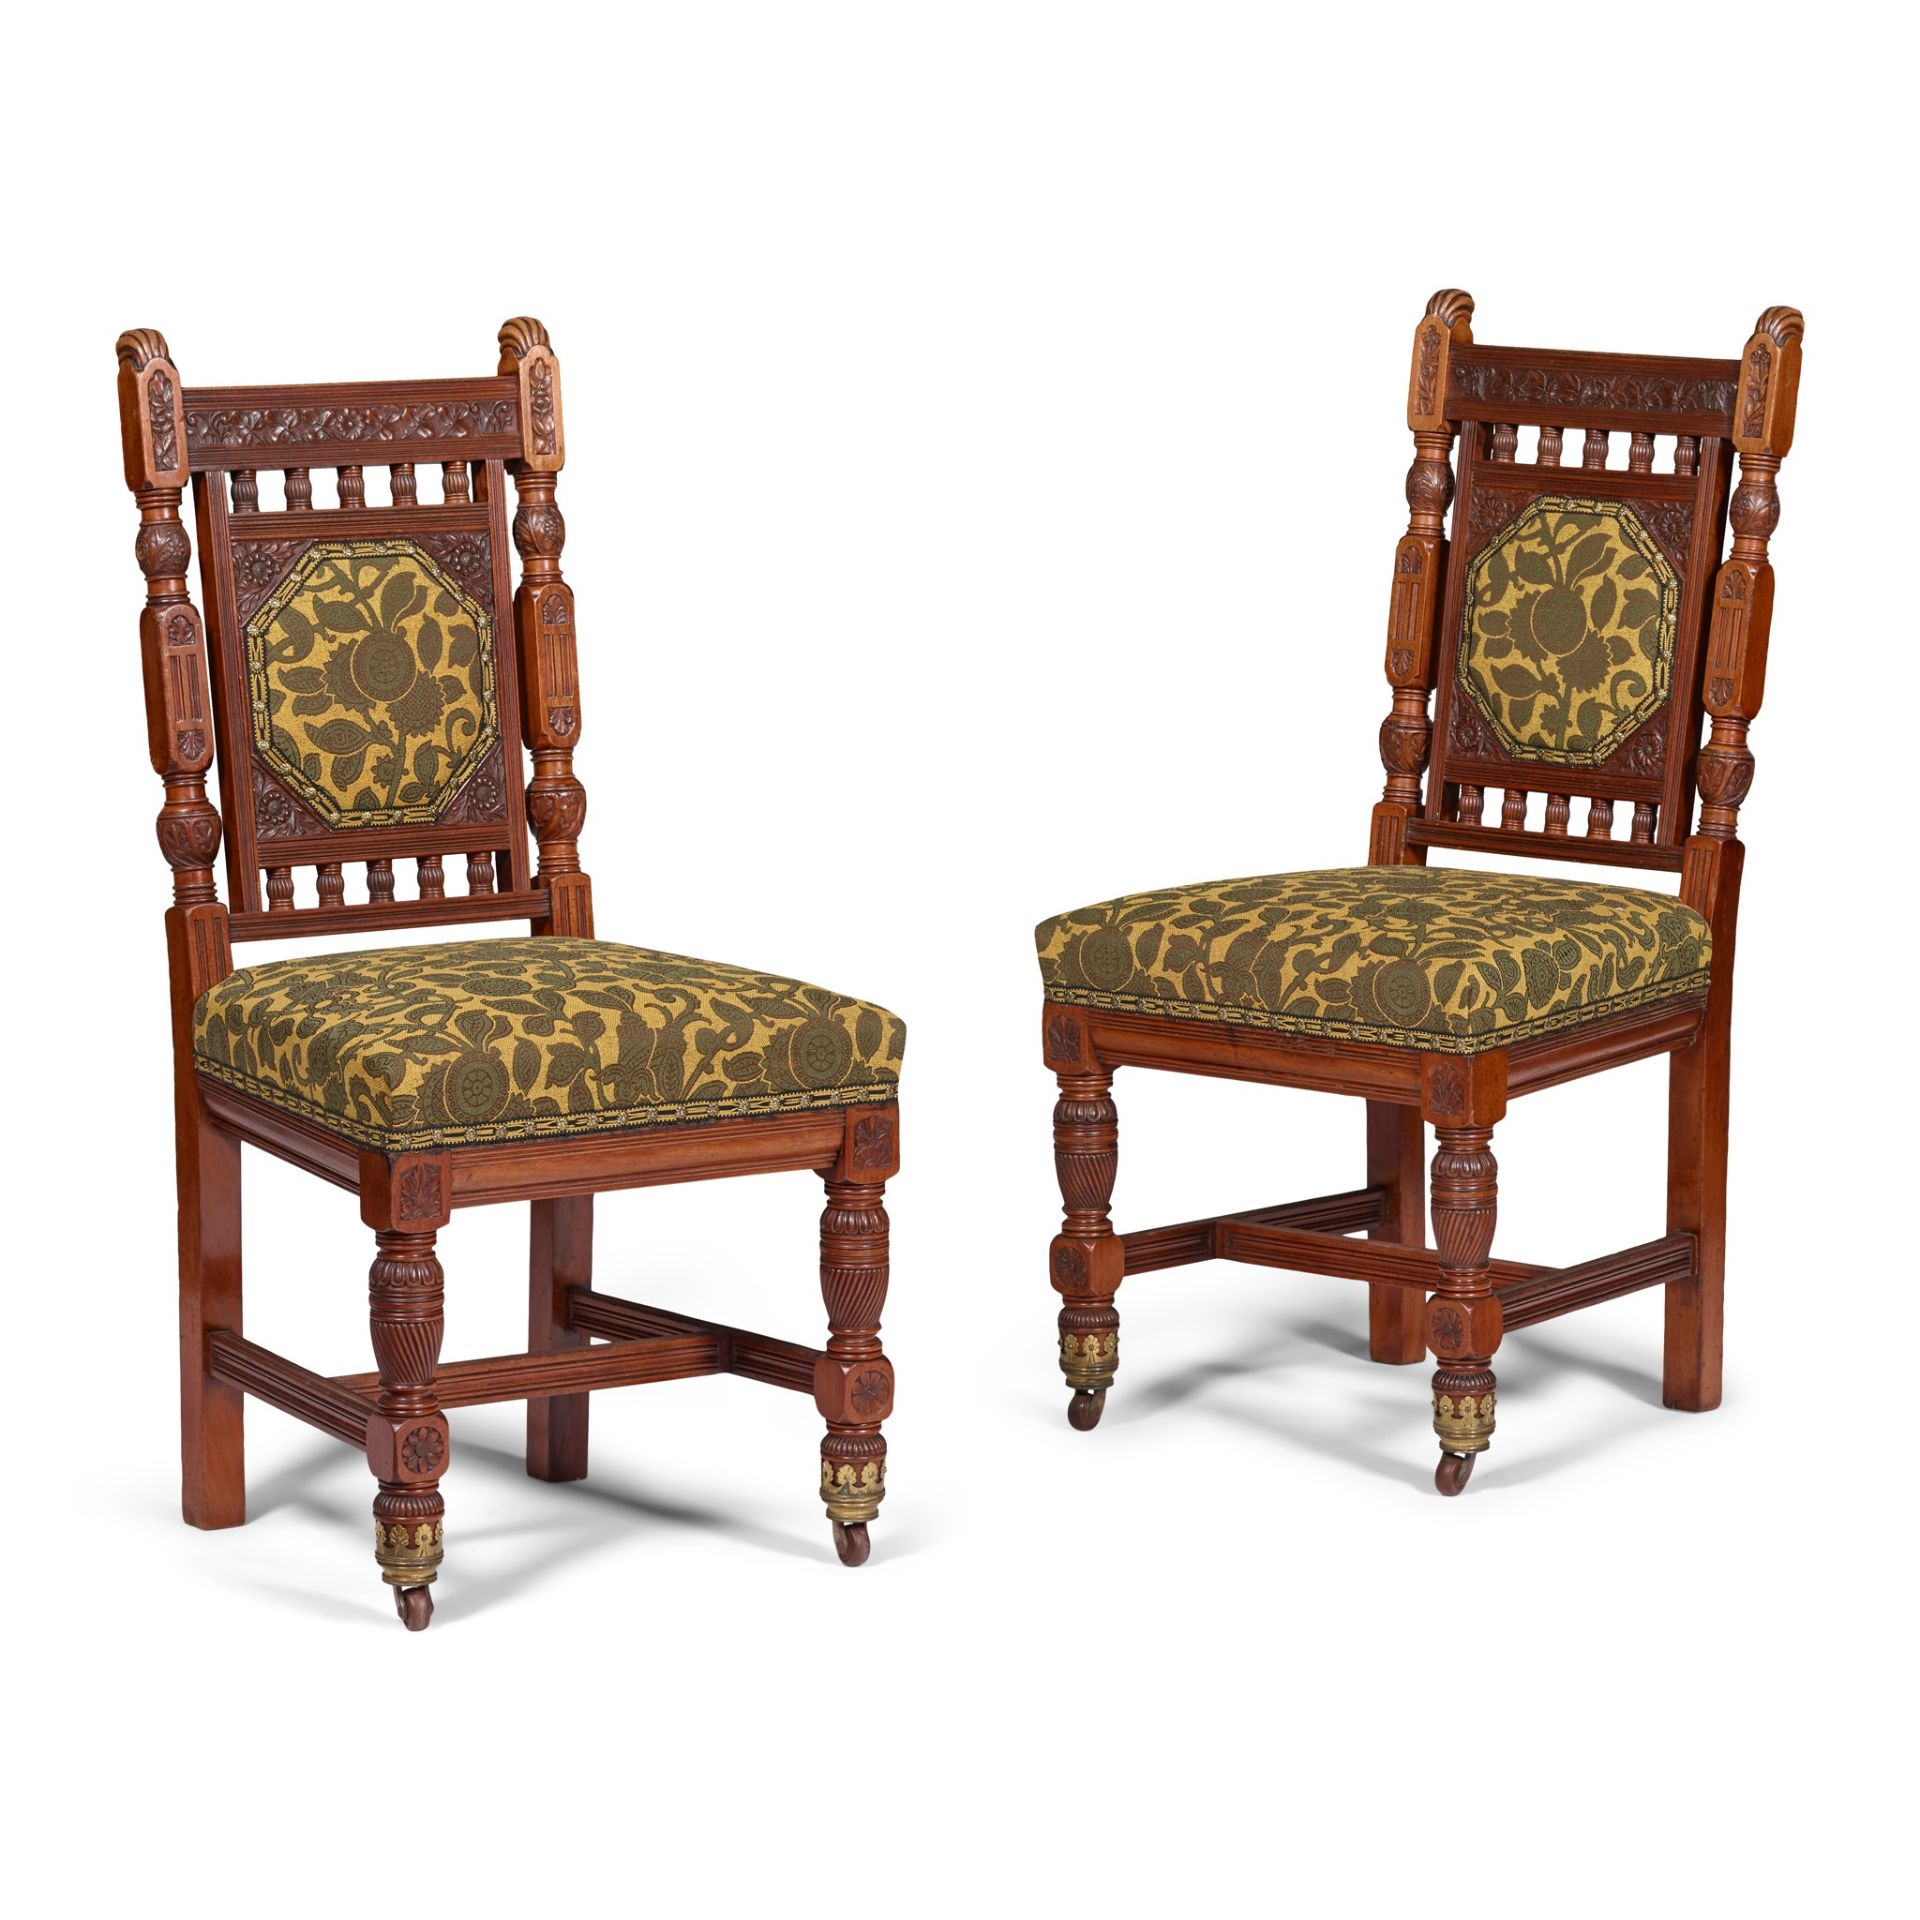 H.W. BATLEY (1846-1932) PAIR OF AESTHETIC MOVEMENT SIDE CHAIRS, CIRCA 1870